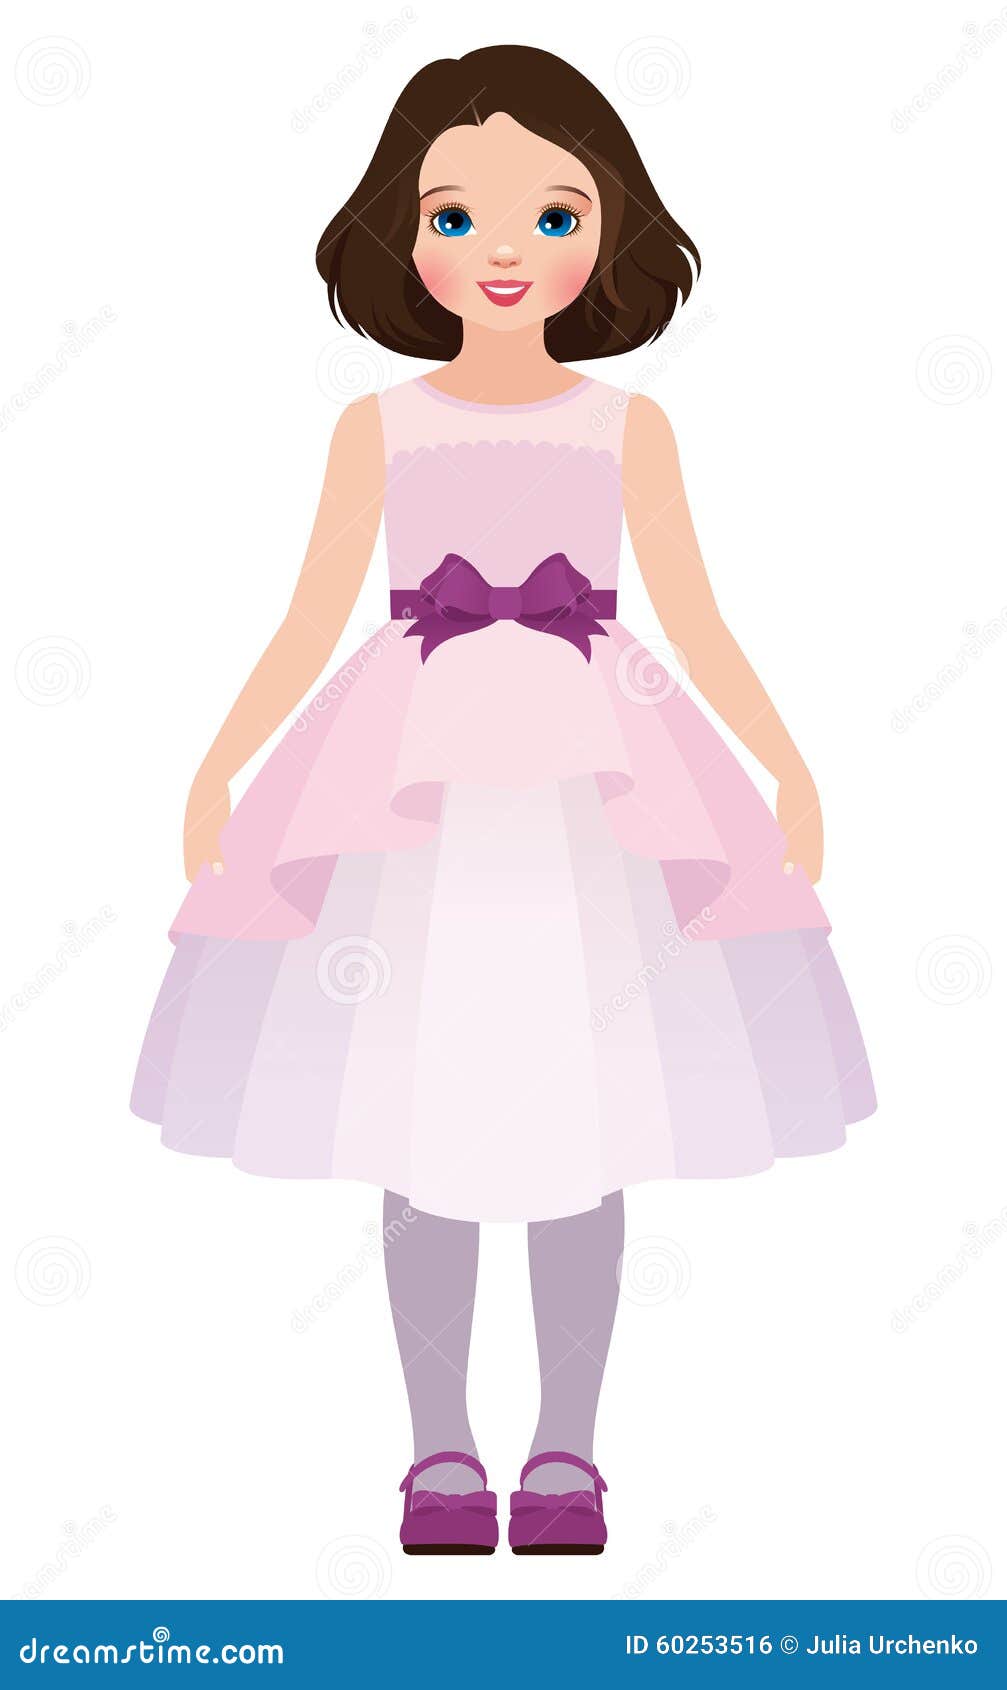 Fashion Little Girl in a Beautiful Dress Stock Vector - Illustration of ...